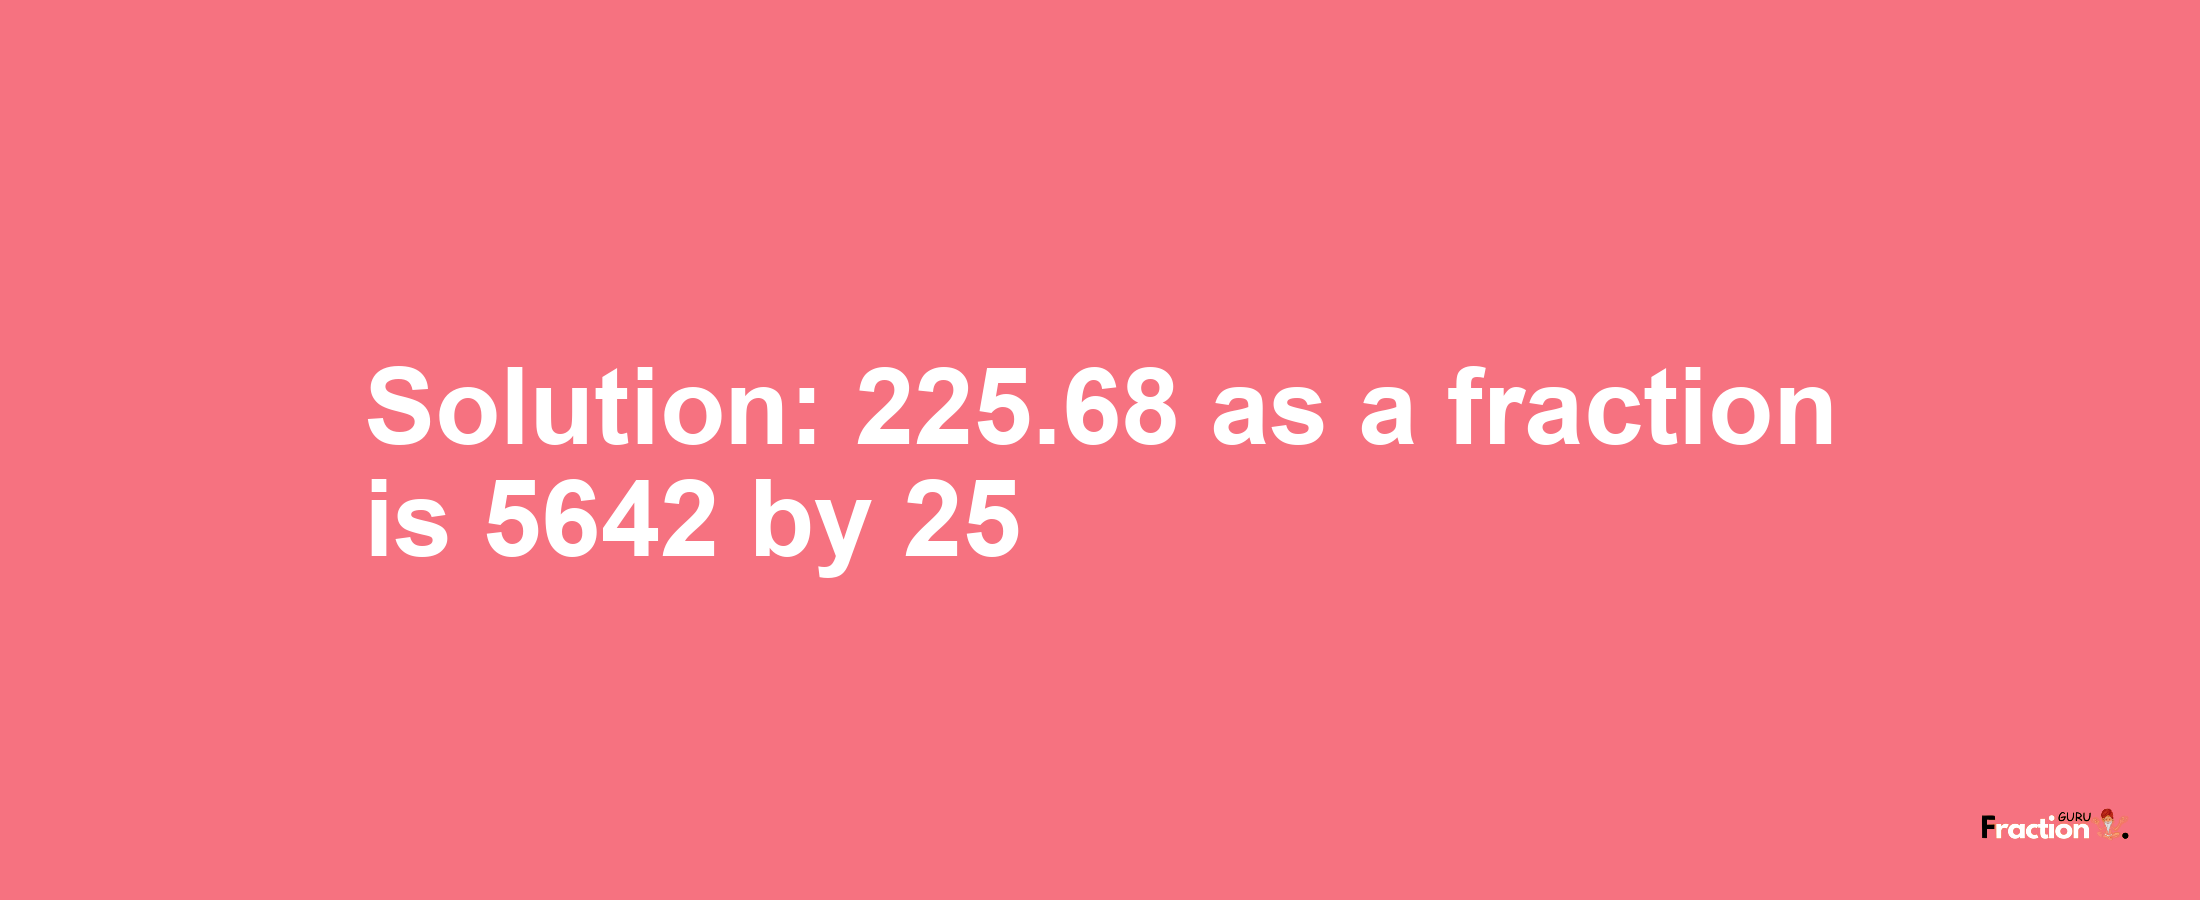 Solution:225.68 as a fraction is 5642/25